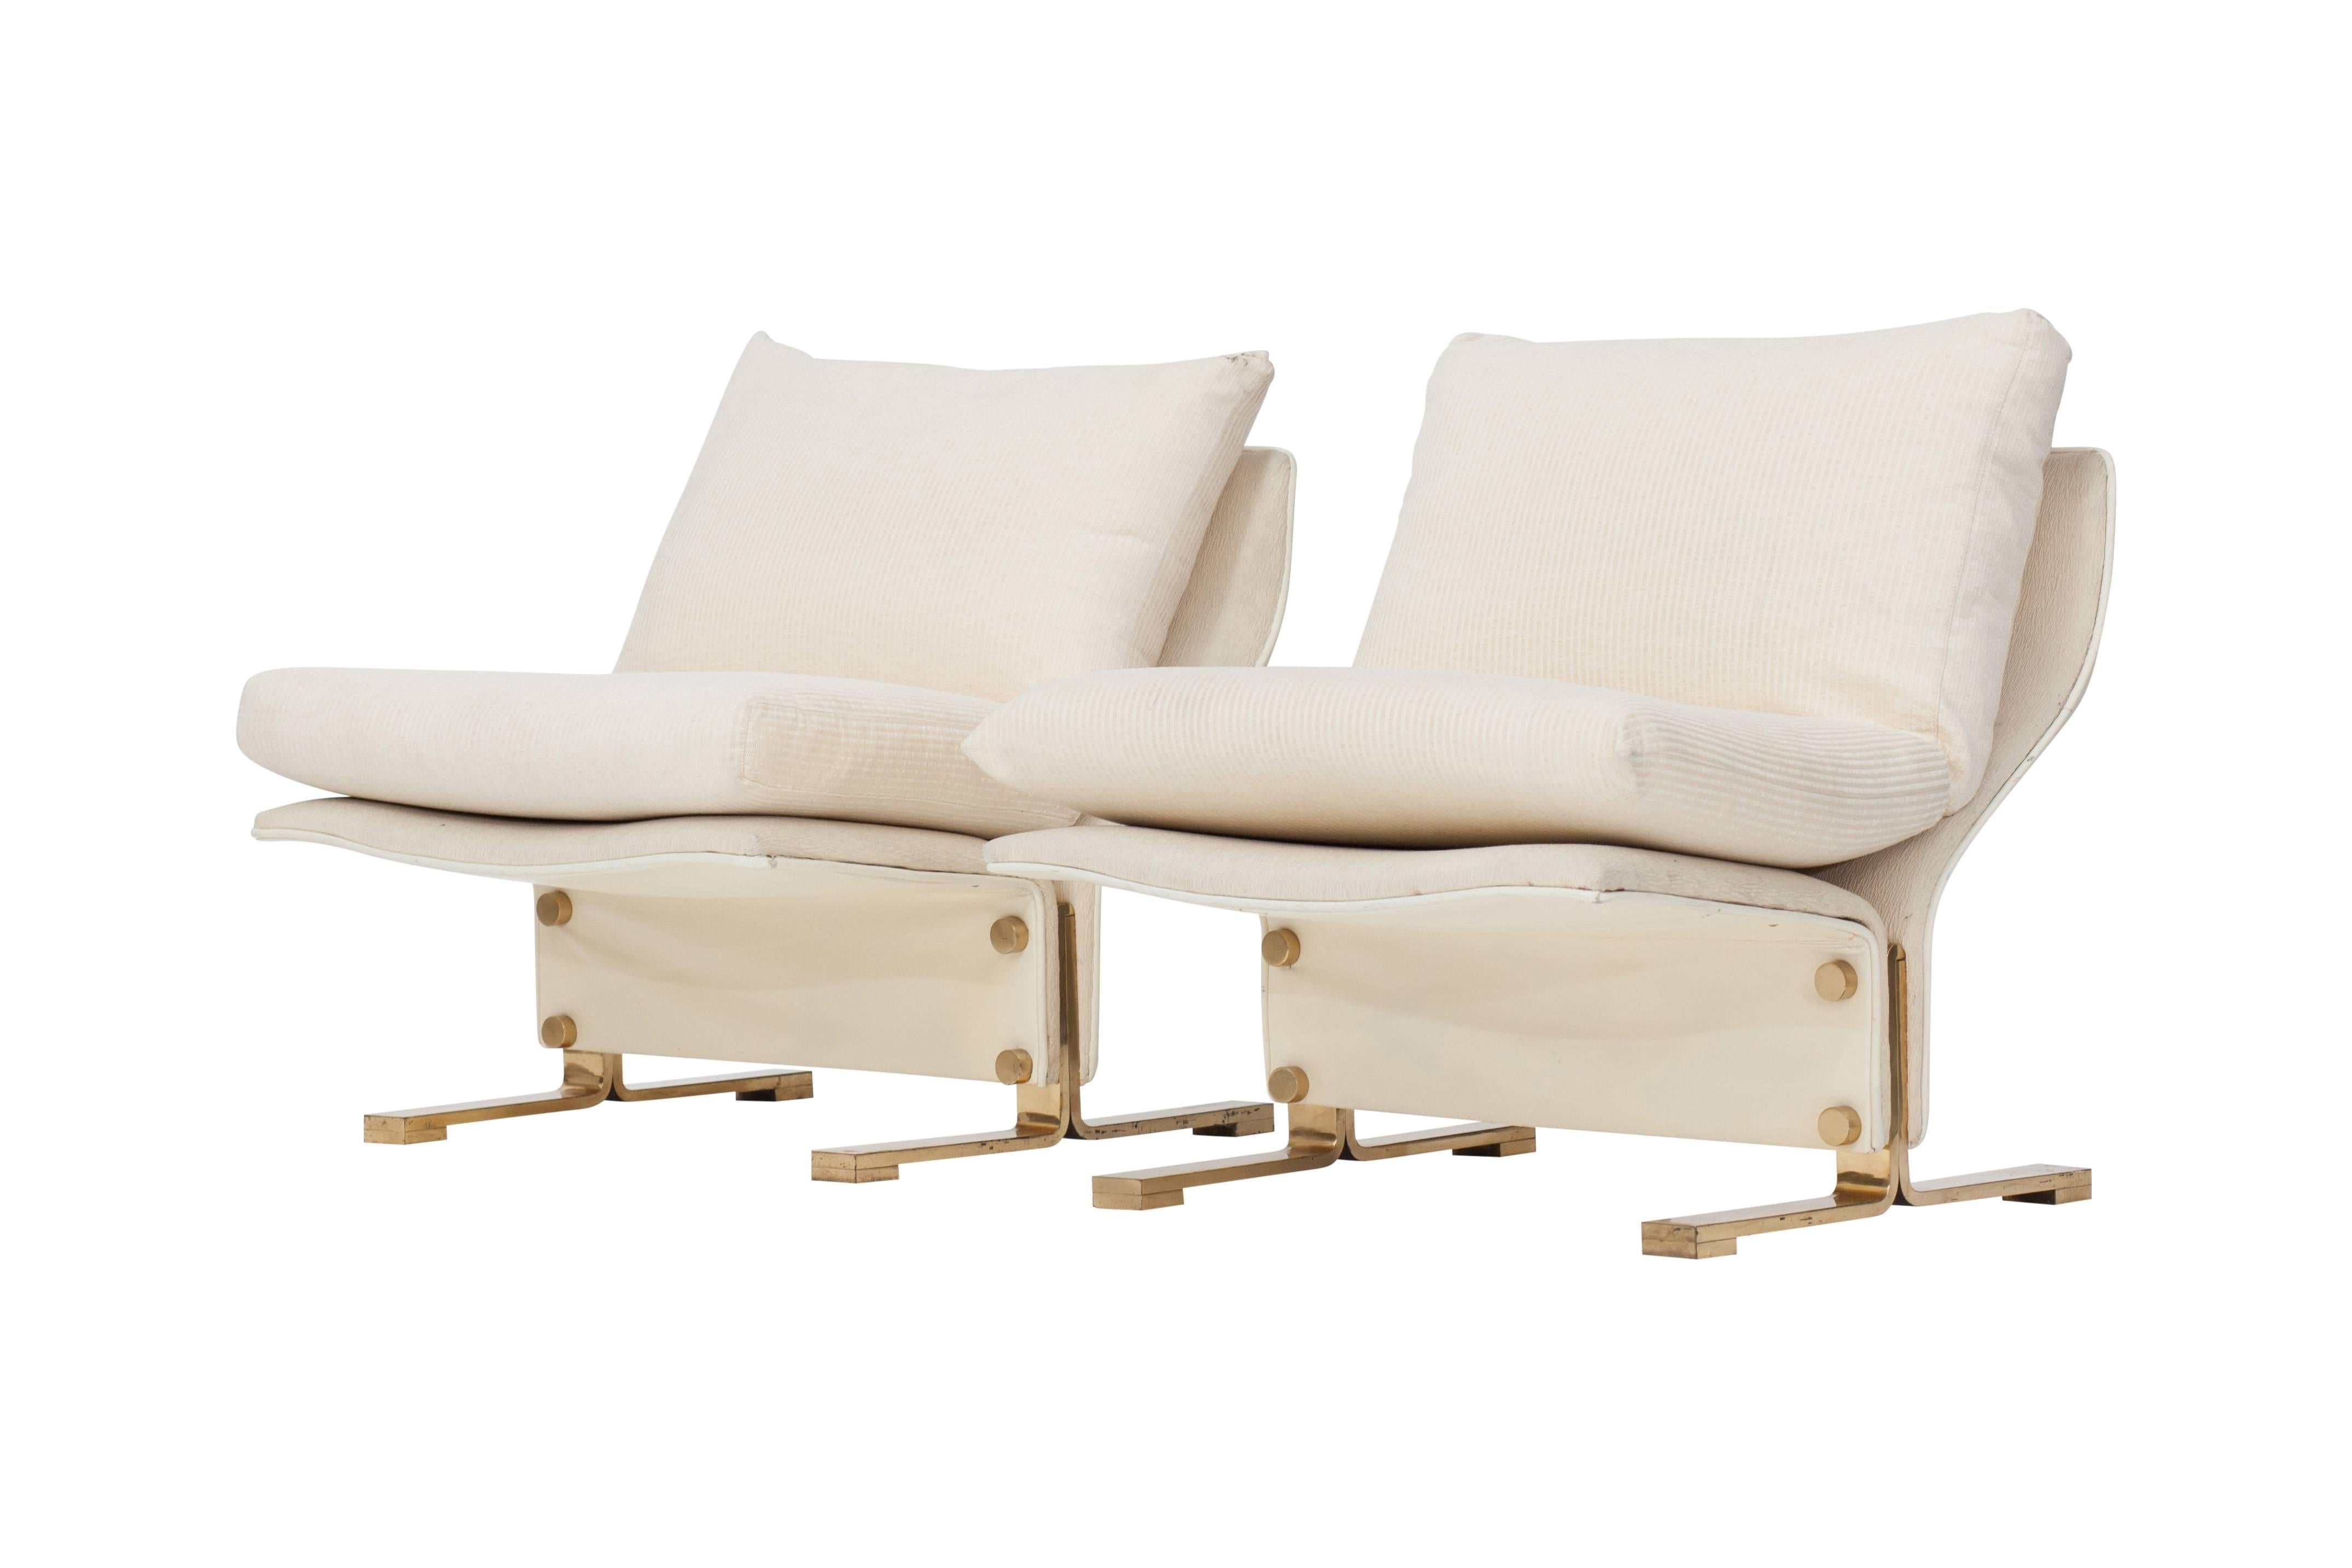 Hollywood Regency Marzio Cecchi Pair of Lounge chairs Italy, 1960s